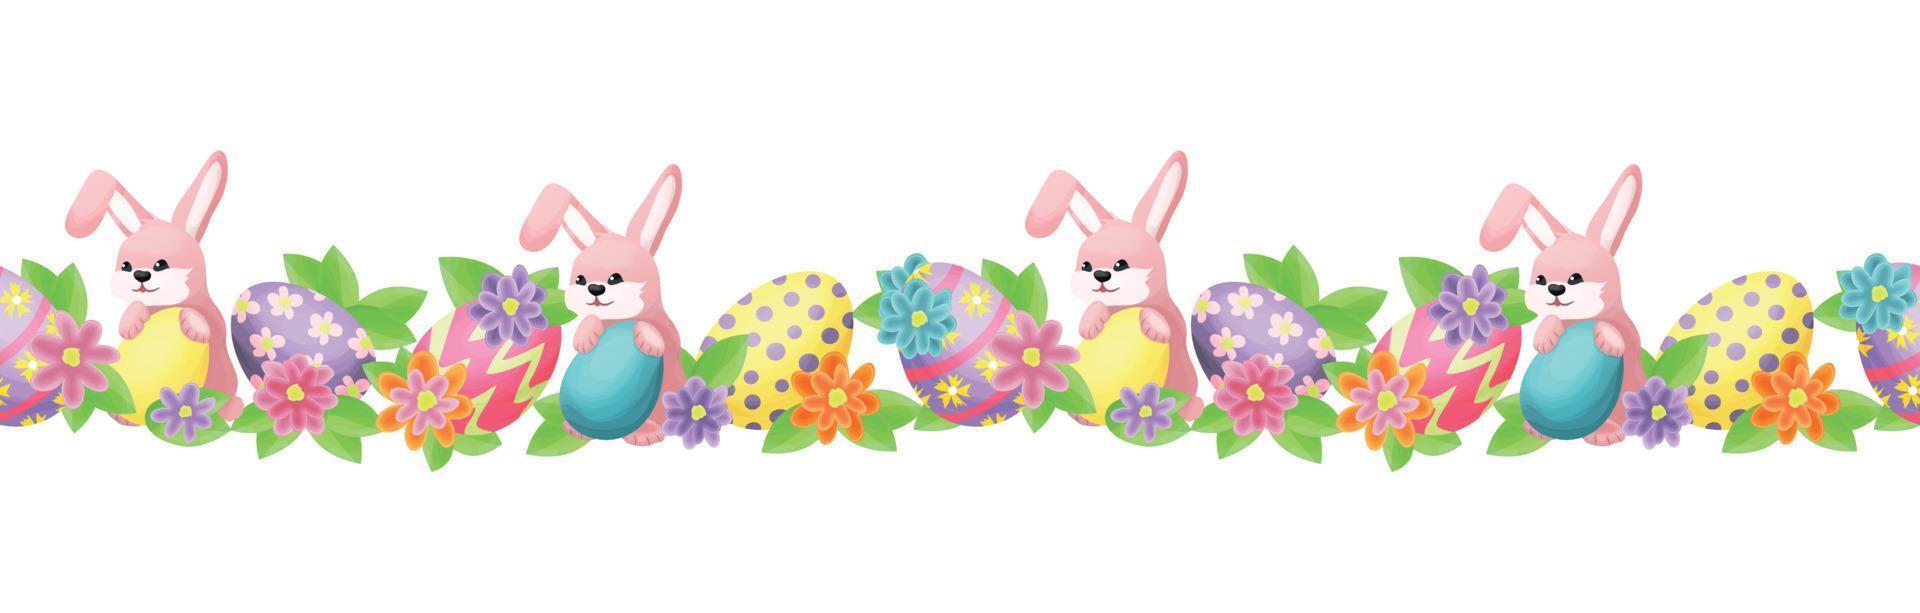 Seamless border with cute bunnies and Easter eggs against a background of leaves, flowers, and butterflies. Eggs in pink, yellow and blue. vector